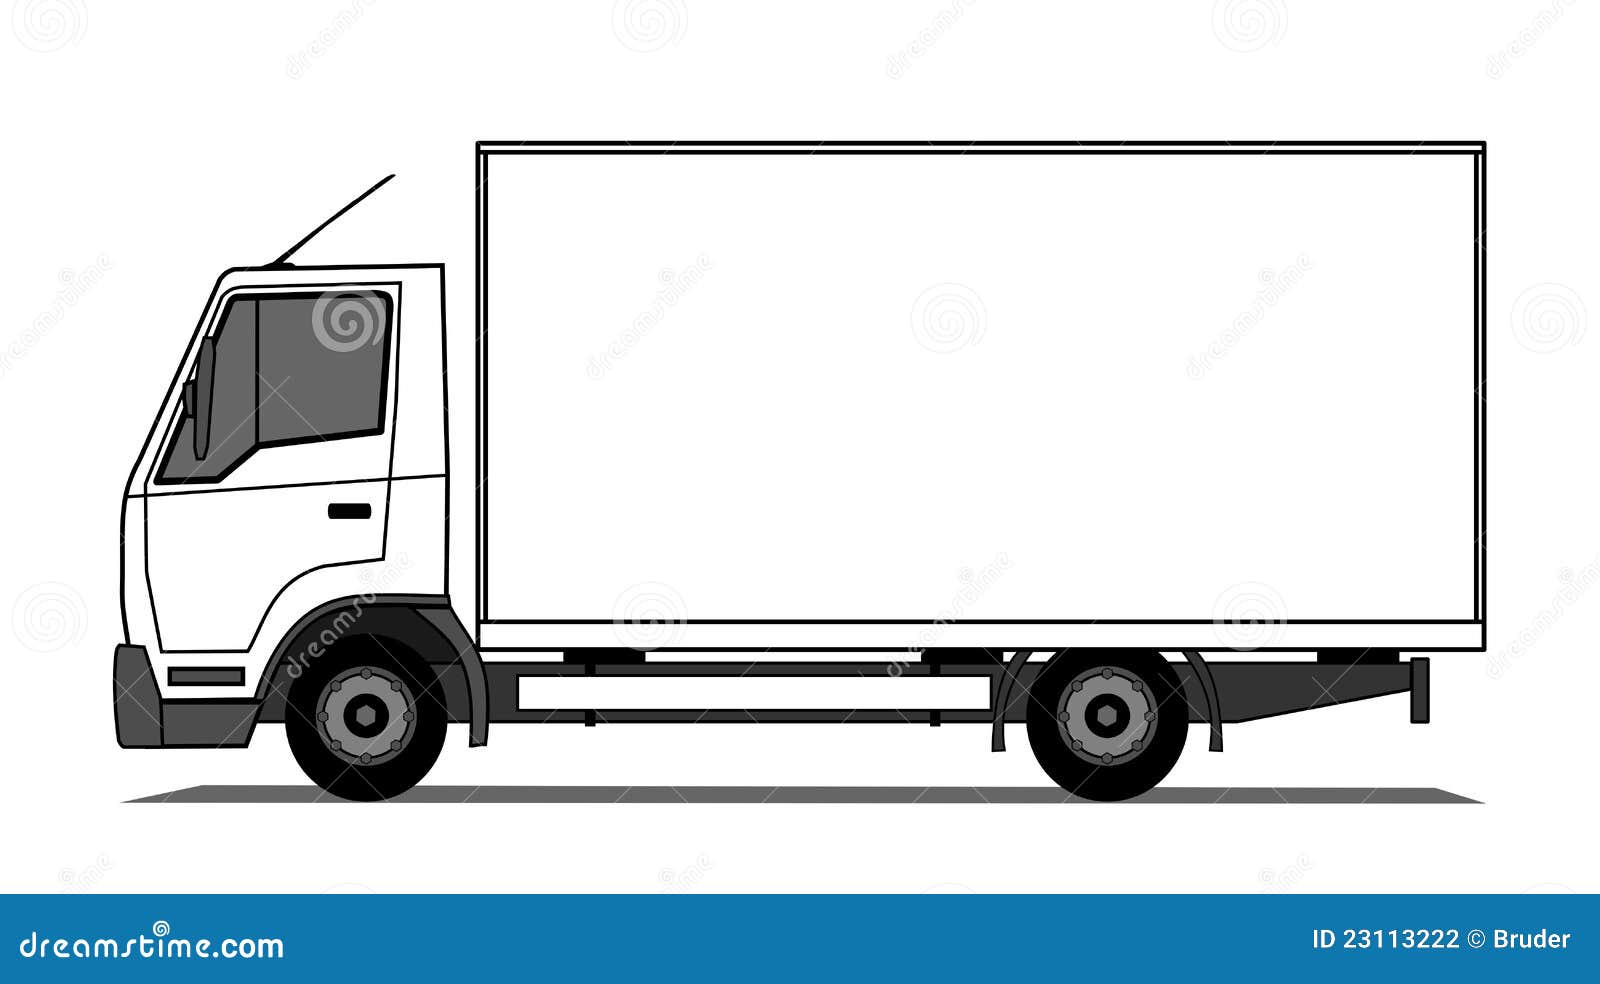 clipart of delivery truck - photo #47